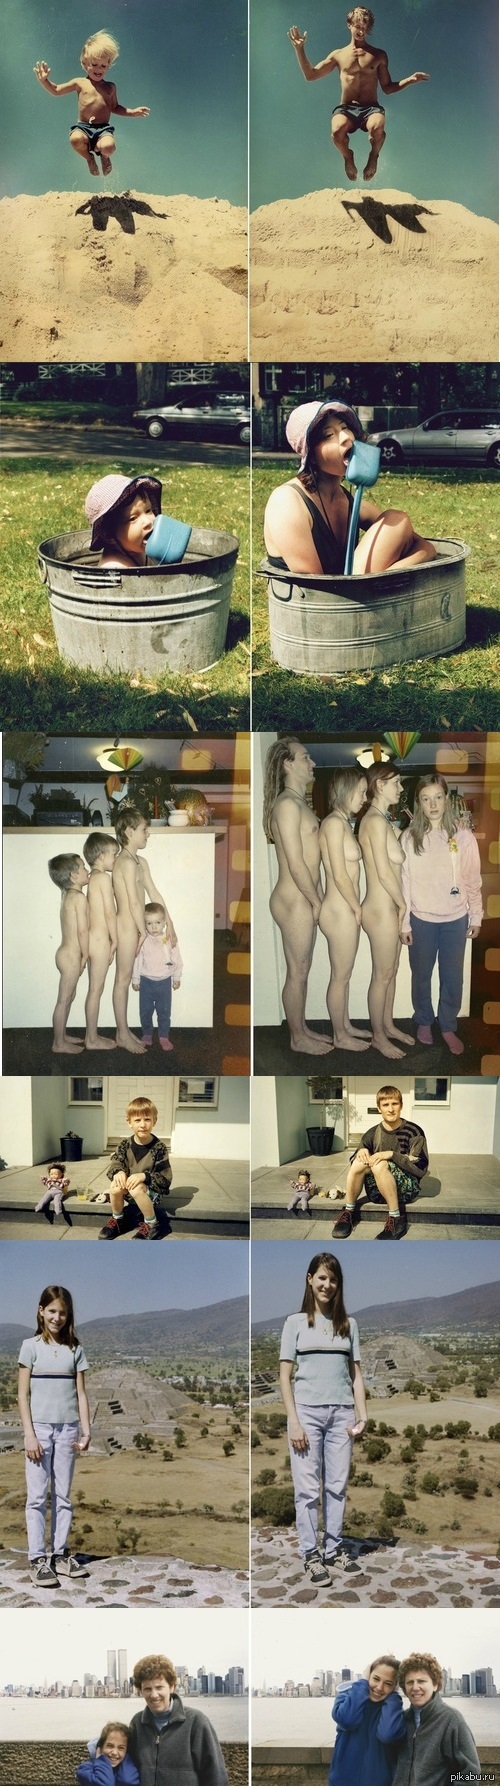 Then and Now - NSFW, Children, Adults, The photo, Memories